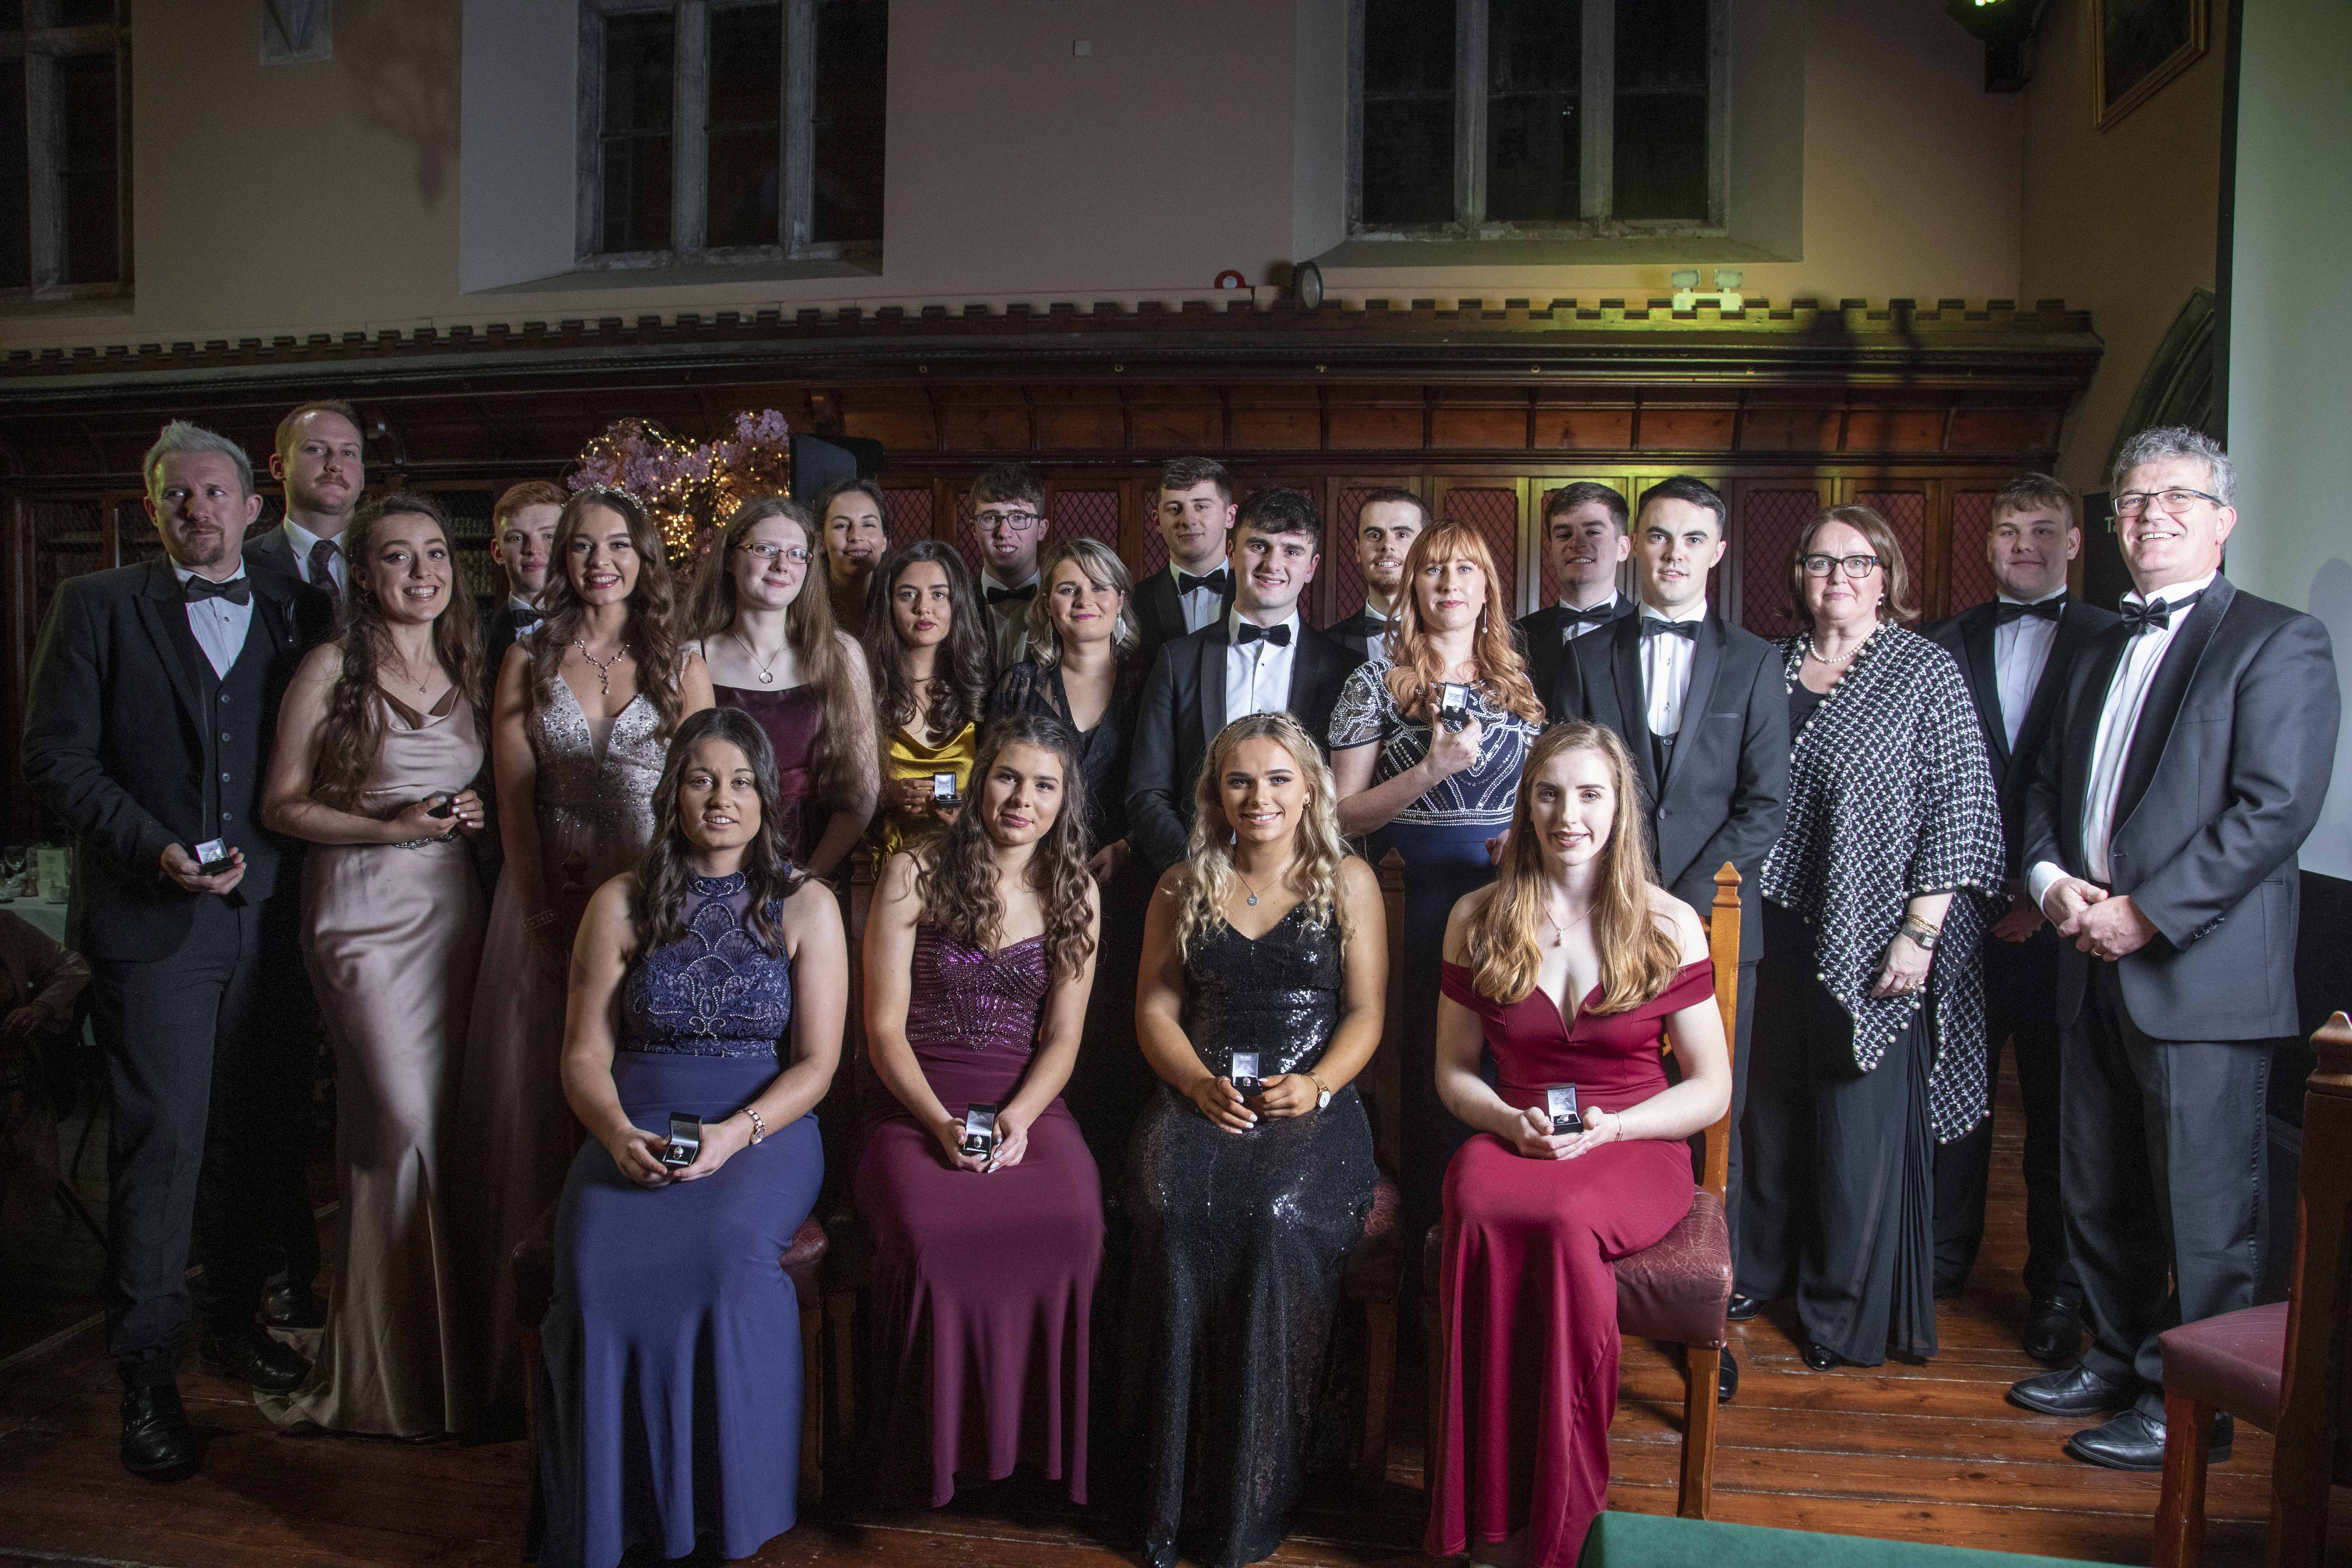 Quercus Talented Students Awards Gala 2019/2020 